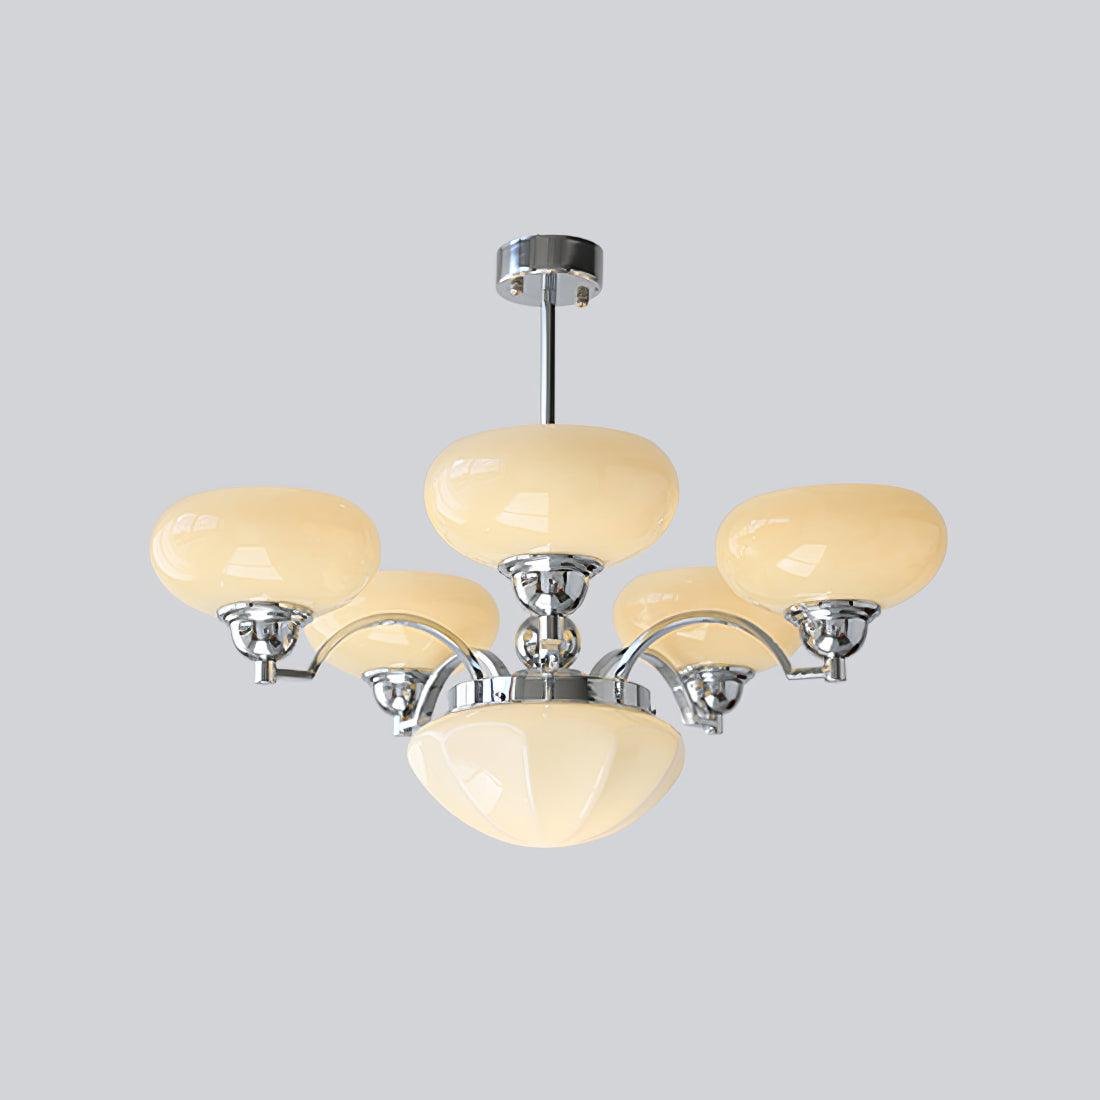 Warre Chandelier with 6 heads, measuring 26.5 inches in diameter and 11 inches in height (70cm x 28cm), in Chrome and Beige.